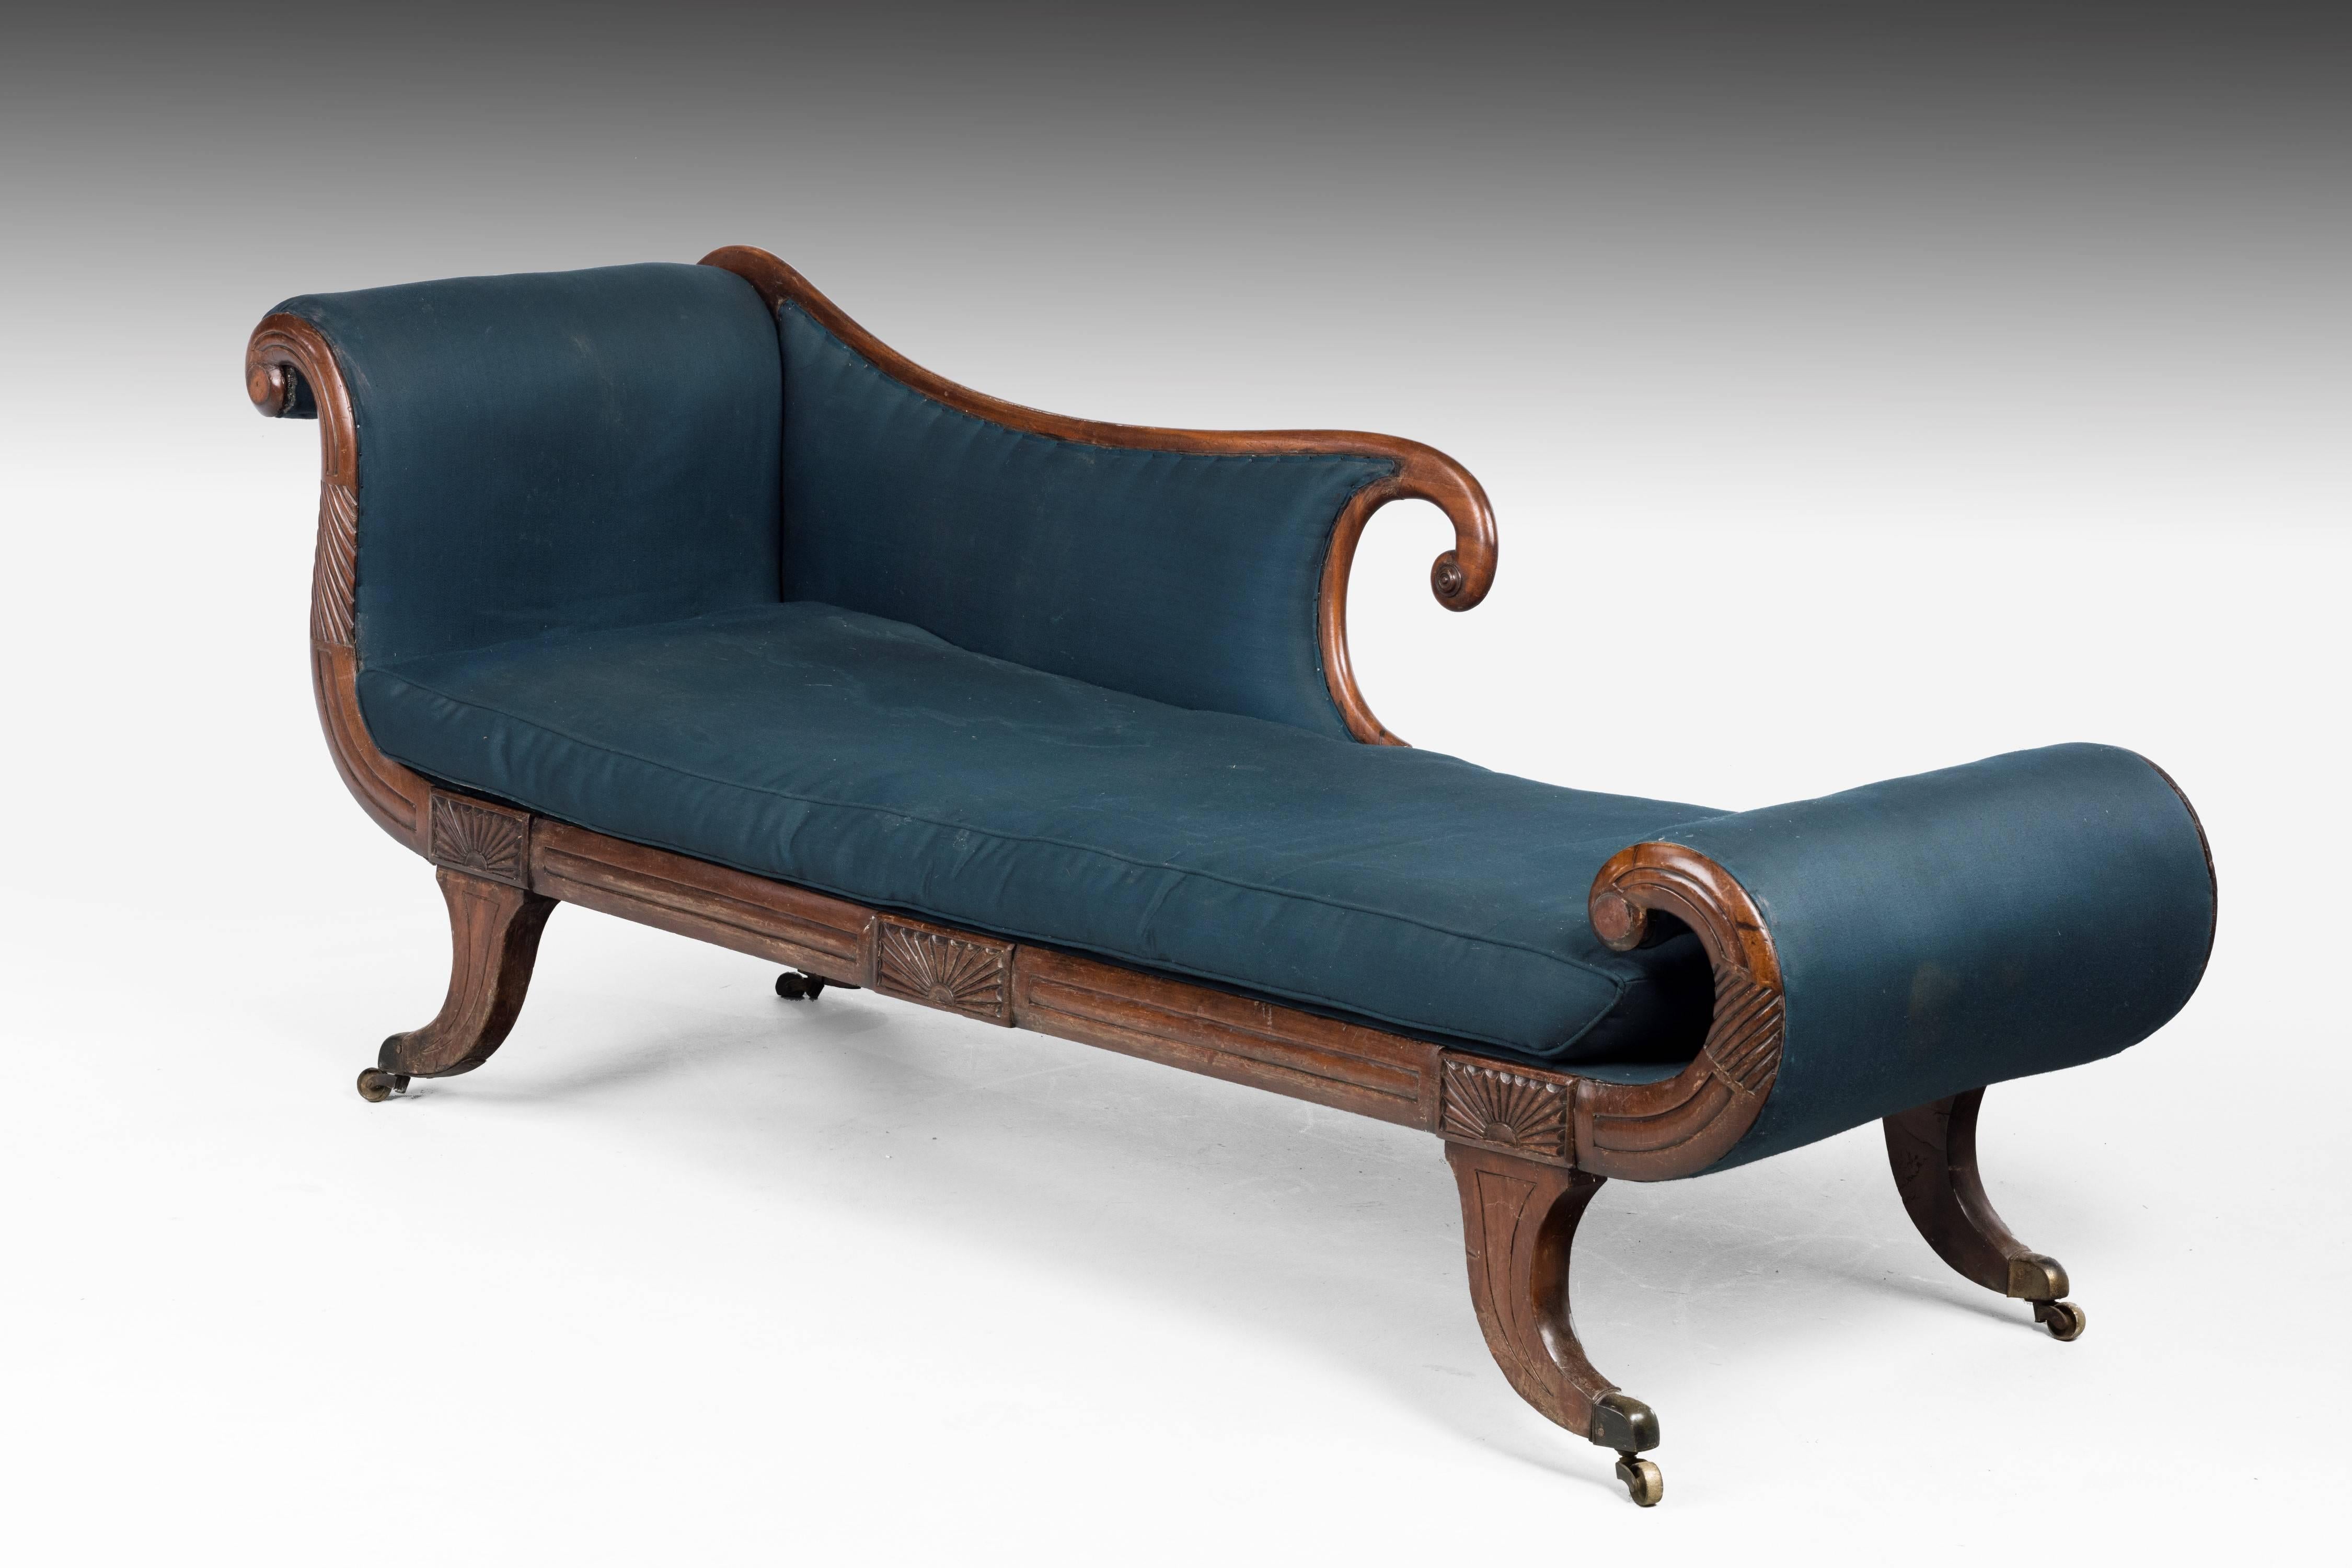 An attractive Regency period Chaise Lounge. On well shaped sabre supports with sun burst carving to the upright sections. Elegant overall lines. The timbers and brass all being original.